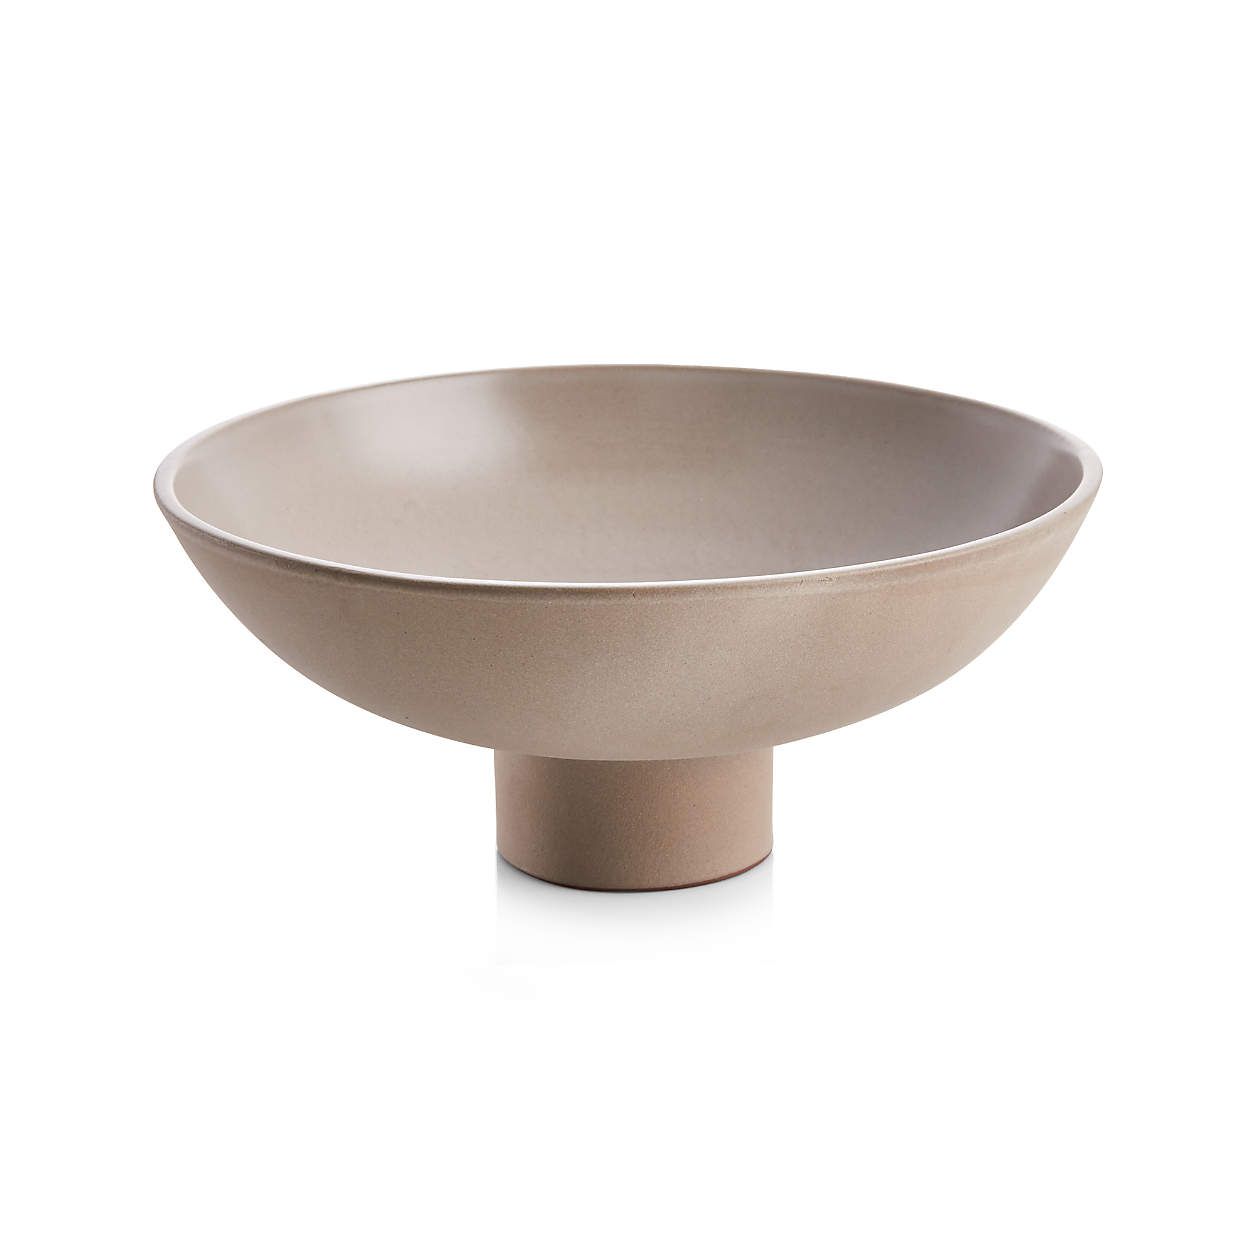 Craft Shop Clay Footed Bowl by Leanne Ford + Reviews | Crate & Barrel | Crate & Barrel